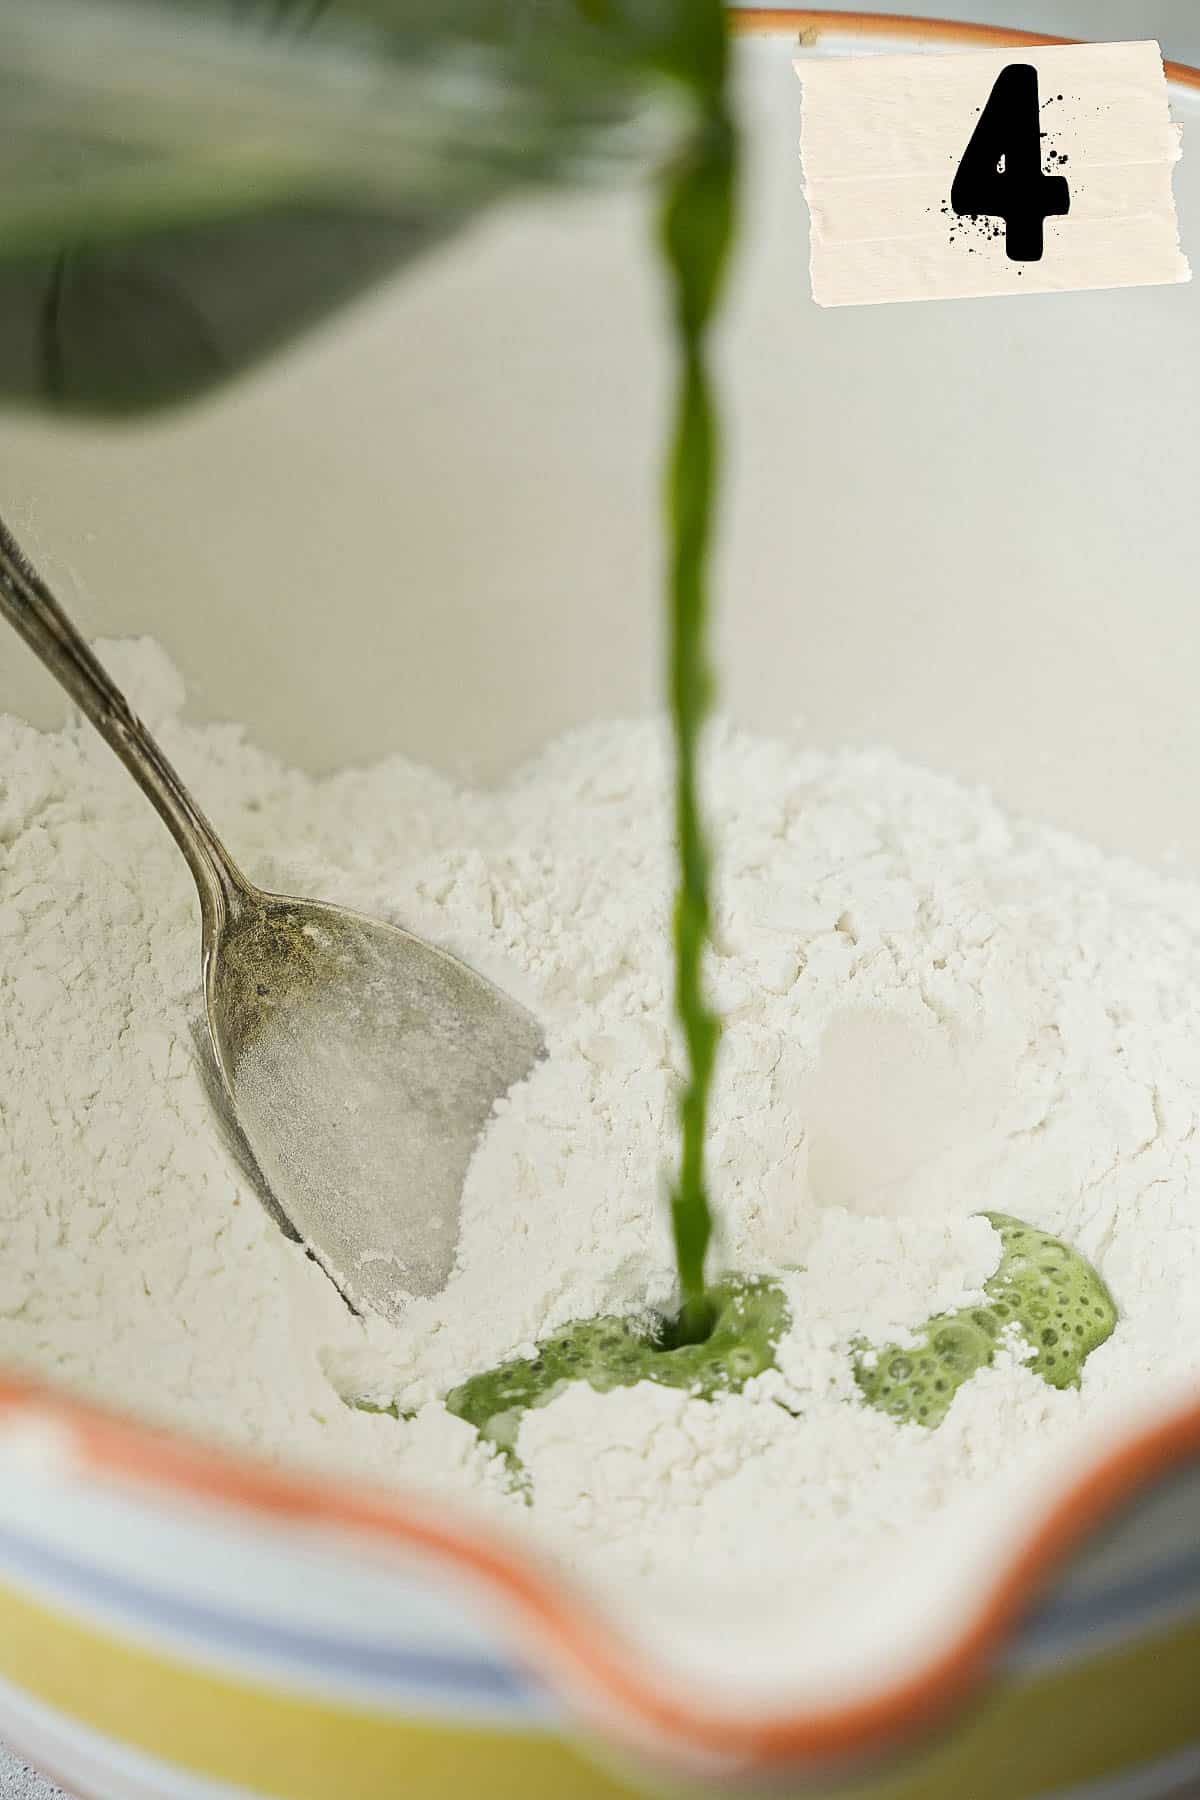 pandan juice is being poured into a bowl of flour with a metal spoon in it.